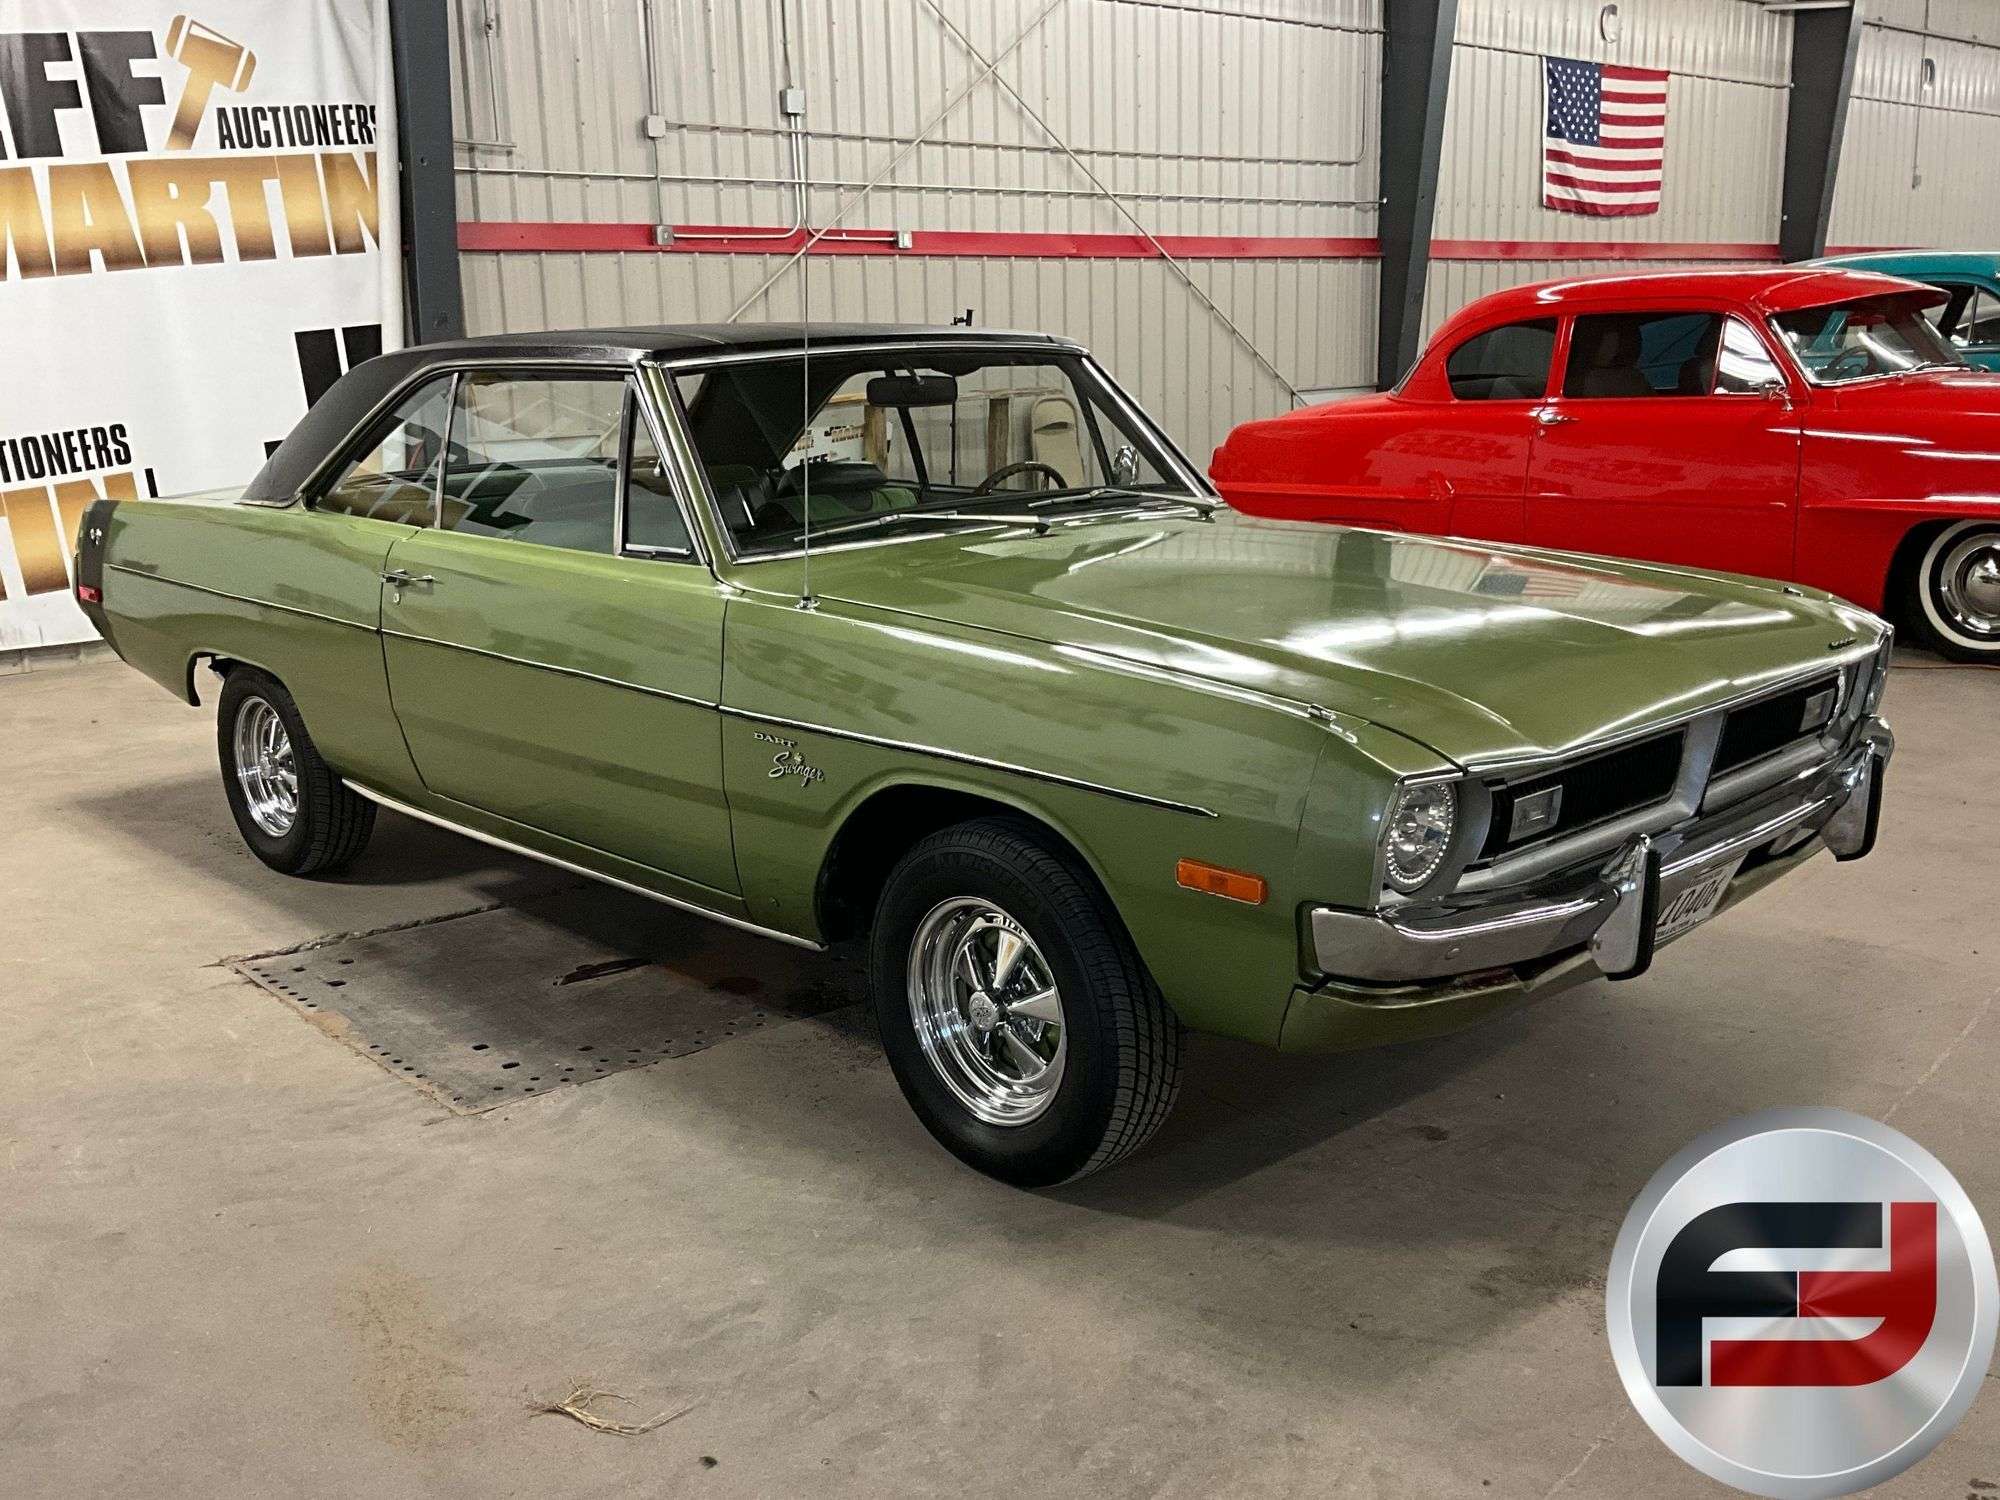 Entry-Level Collectibles Like This 1972 Dodge Dart picture image